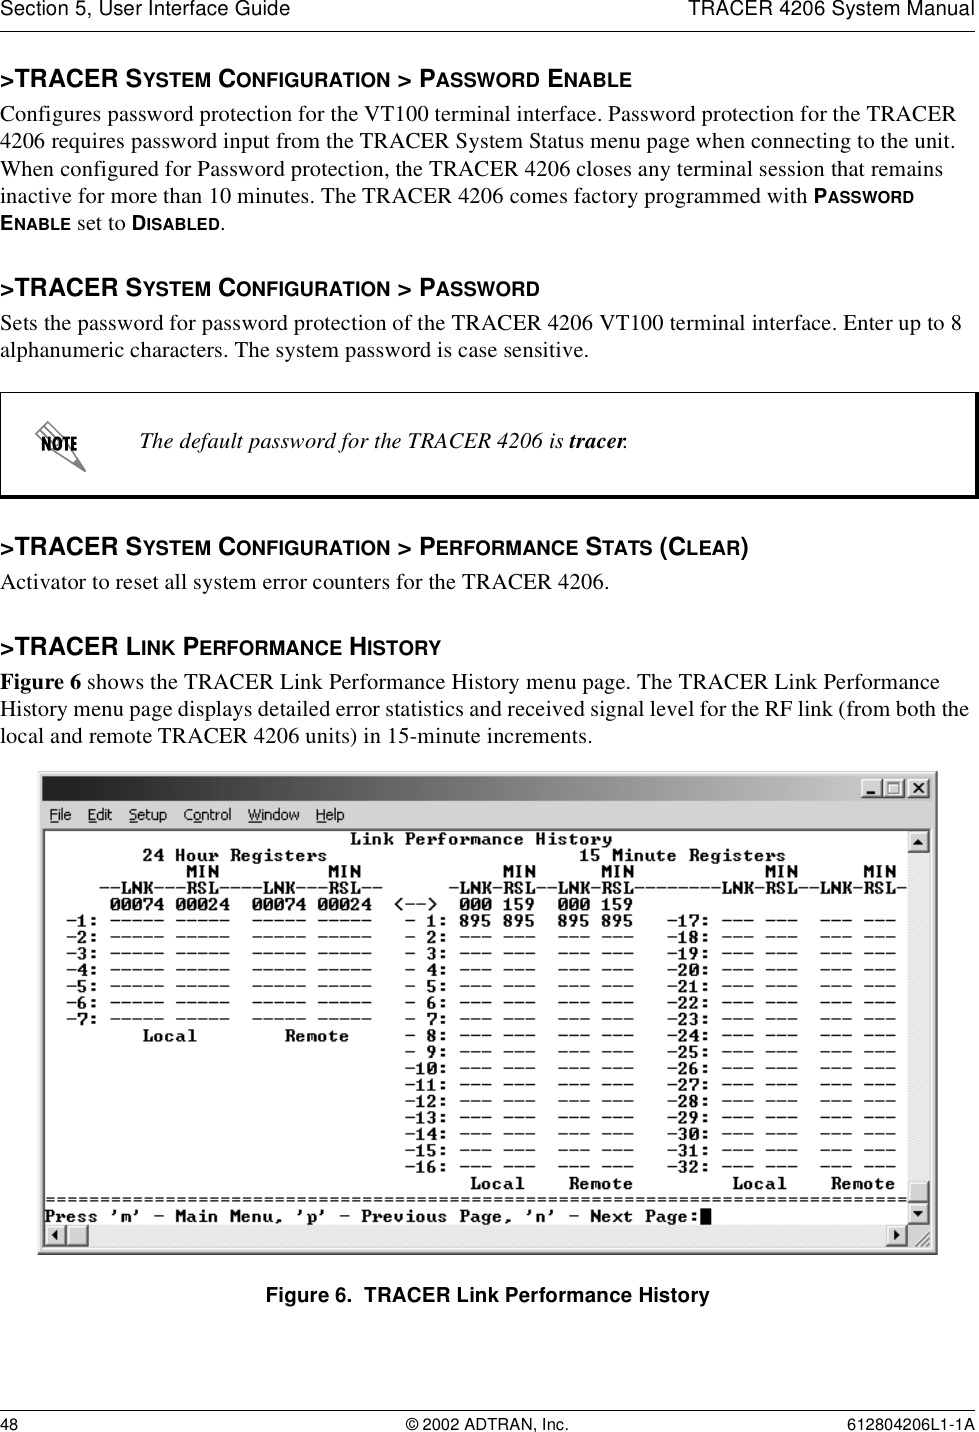 Section 5, User Interface Guide TRACER 4206 System Manual48 © 2002 ADTRAN, Inc. 612804206L1-1A&gt;TRACER SYSTEM CONFIGURATION &gt; PASSWORD ENABLEConfigures password protection for the VT100 terminal interface. Password protection for the TRACER 4206 requires password input from the TRACER System Status menu page when connecting to the unit. When configured for Password protection, the TRACER 4206 closes any terminal session that remains inactive for more than 10 minutes. The TRACER 4206 comes factory programmed with PASSWORD ENABLE set to DISABLED. &gt;TRACER SYSTEM CONFIGURATION &gt; PASSWORDSets the password for password protection of the TRACER 4206 VT100 terminal interface. Enter up to 8 alphanumeric characters. The system password is case sensitive.&gt;TRACER SYSTEM CONFIGURATION &gt; PERFORMANCE STATS (CLEAR)Activator to reset all system error counters for the TRACER 4206.&gt;TRACER LINK PERFORMANCE HISTORYFigure 6 shows the TRACER Link Performance History menu page. The TRACER Link Performance History menu page displays detailed error statistics and received signal level for the RF link (from both the local and remote TRACER 4206 units) in 15-minute increments. Figure 6.  TRACER Link Performance HistoryThe default password for the TRACER 4206 is tracer.